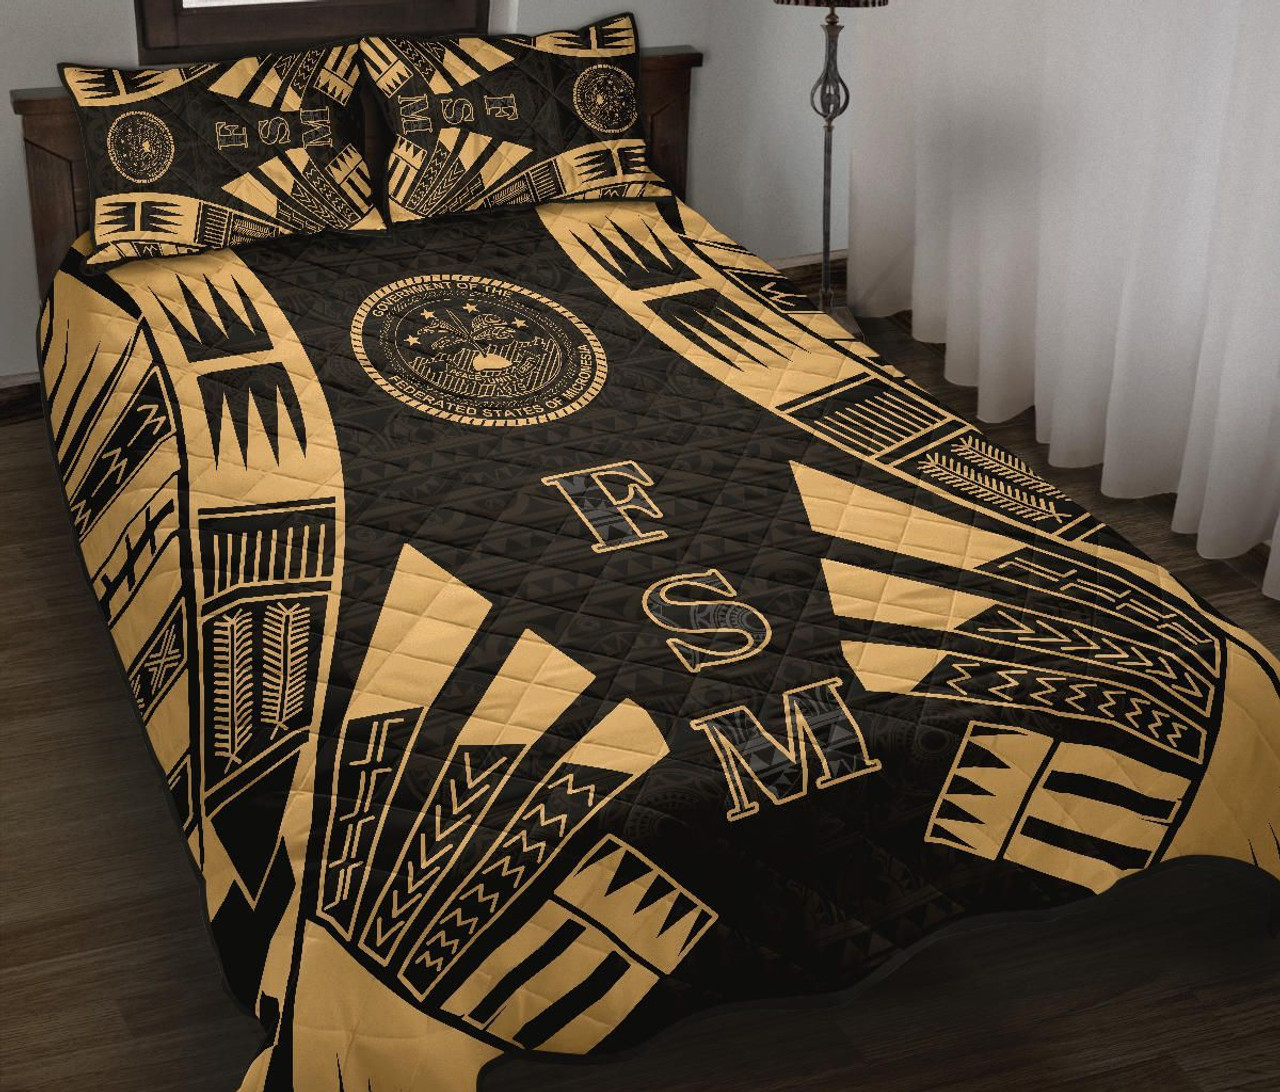 Federated States of Micronesia Quilt Bed Set - Federated States of Micronesia Seal Polynesian Yellow Tattoo Style 2